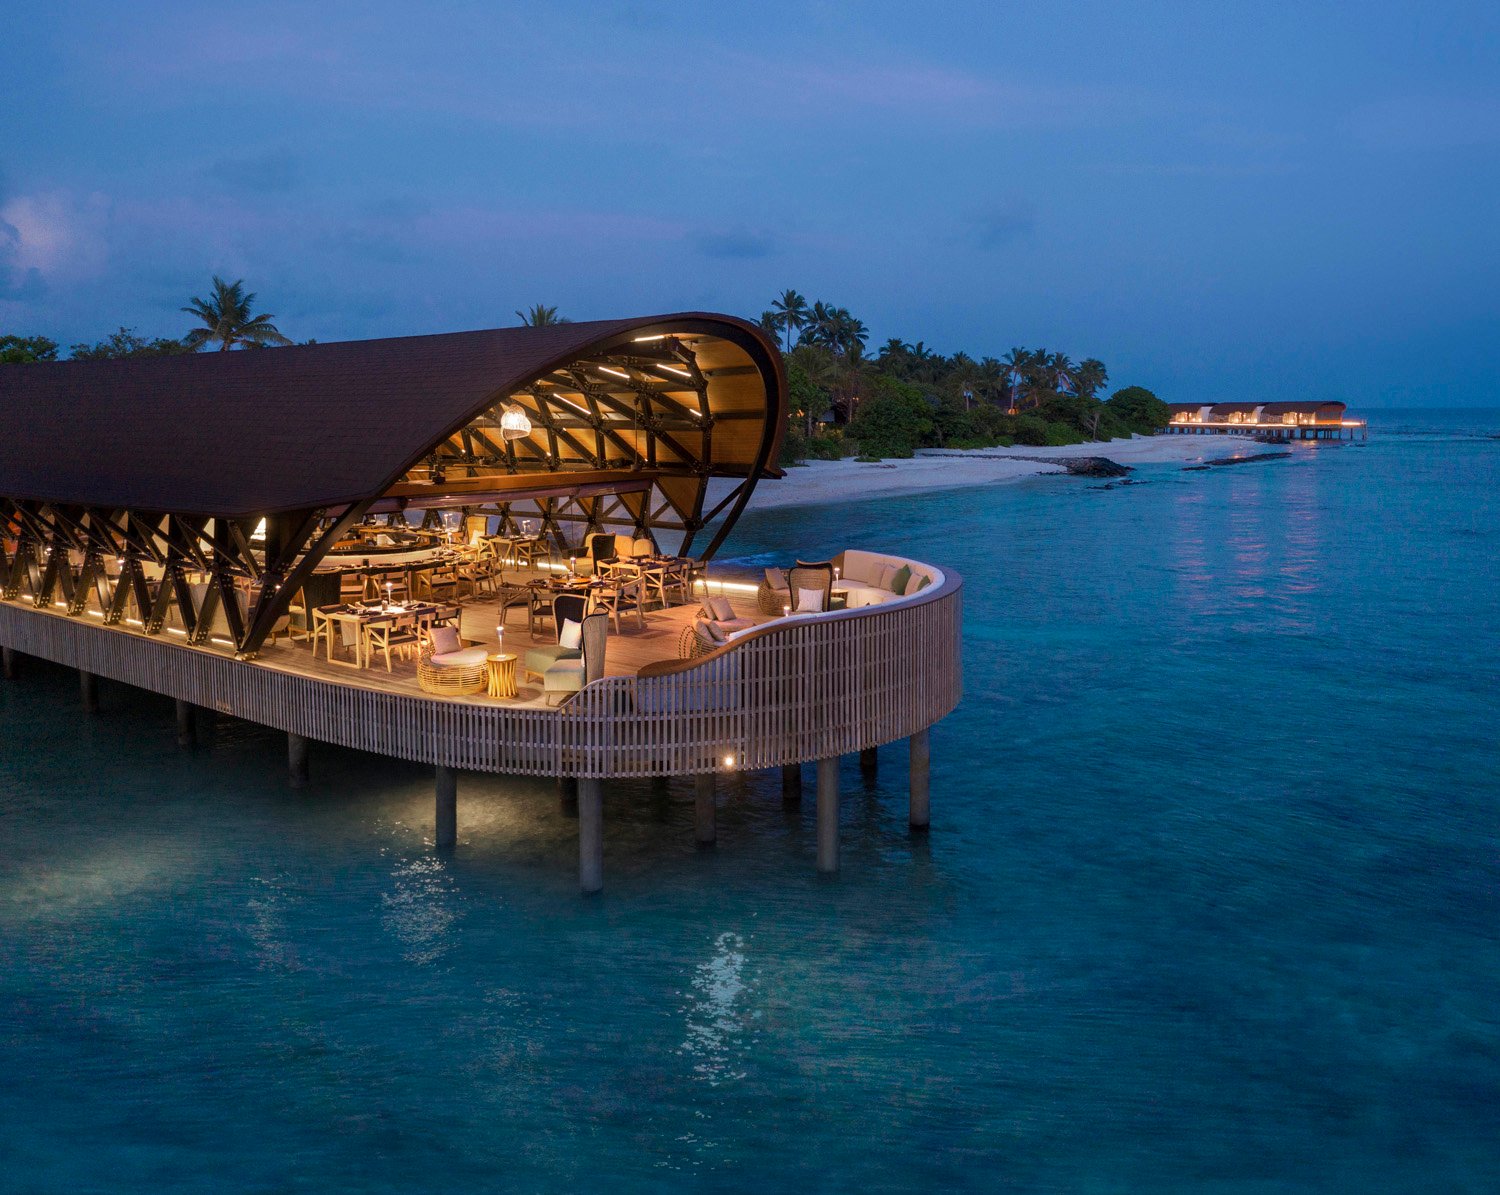 'The pearl' restaurant exterior at night | The Westin Maldives